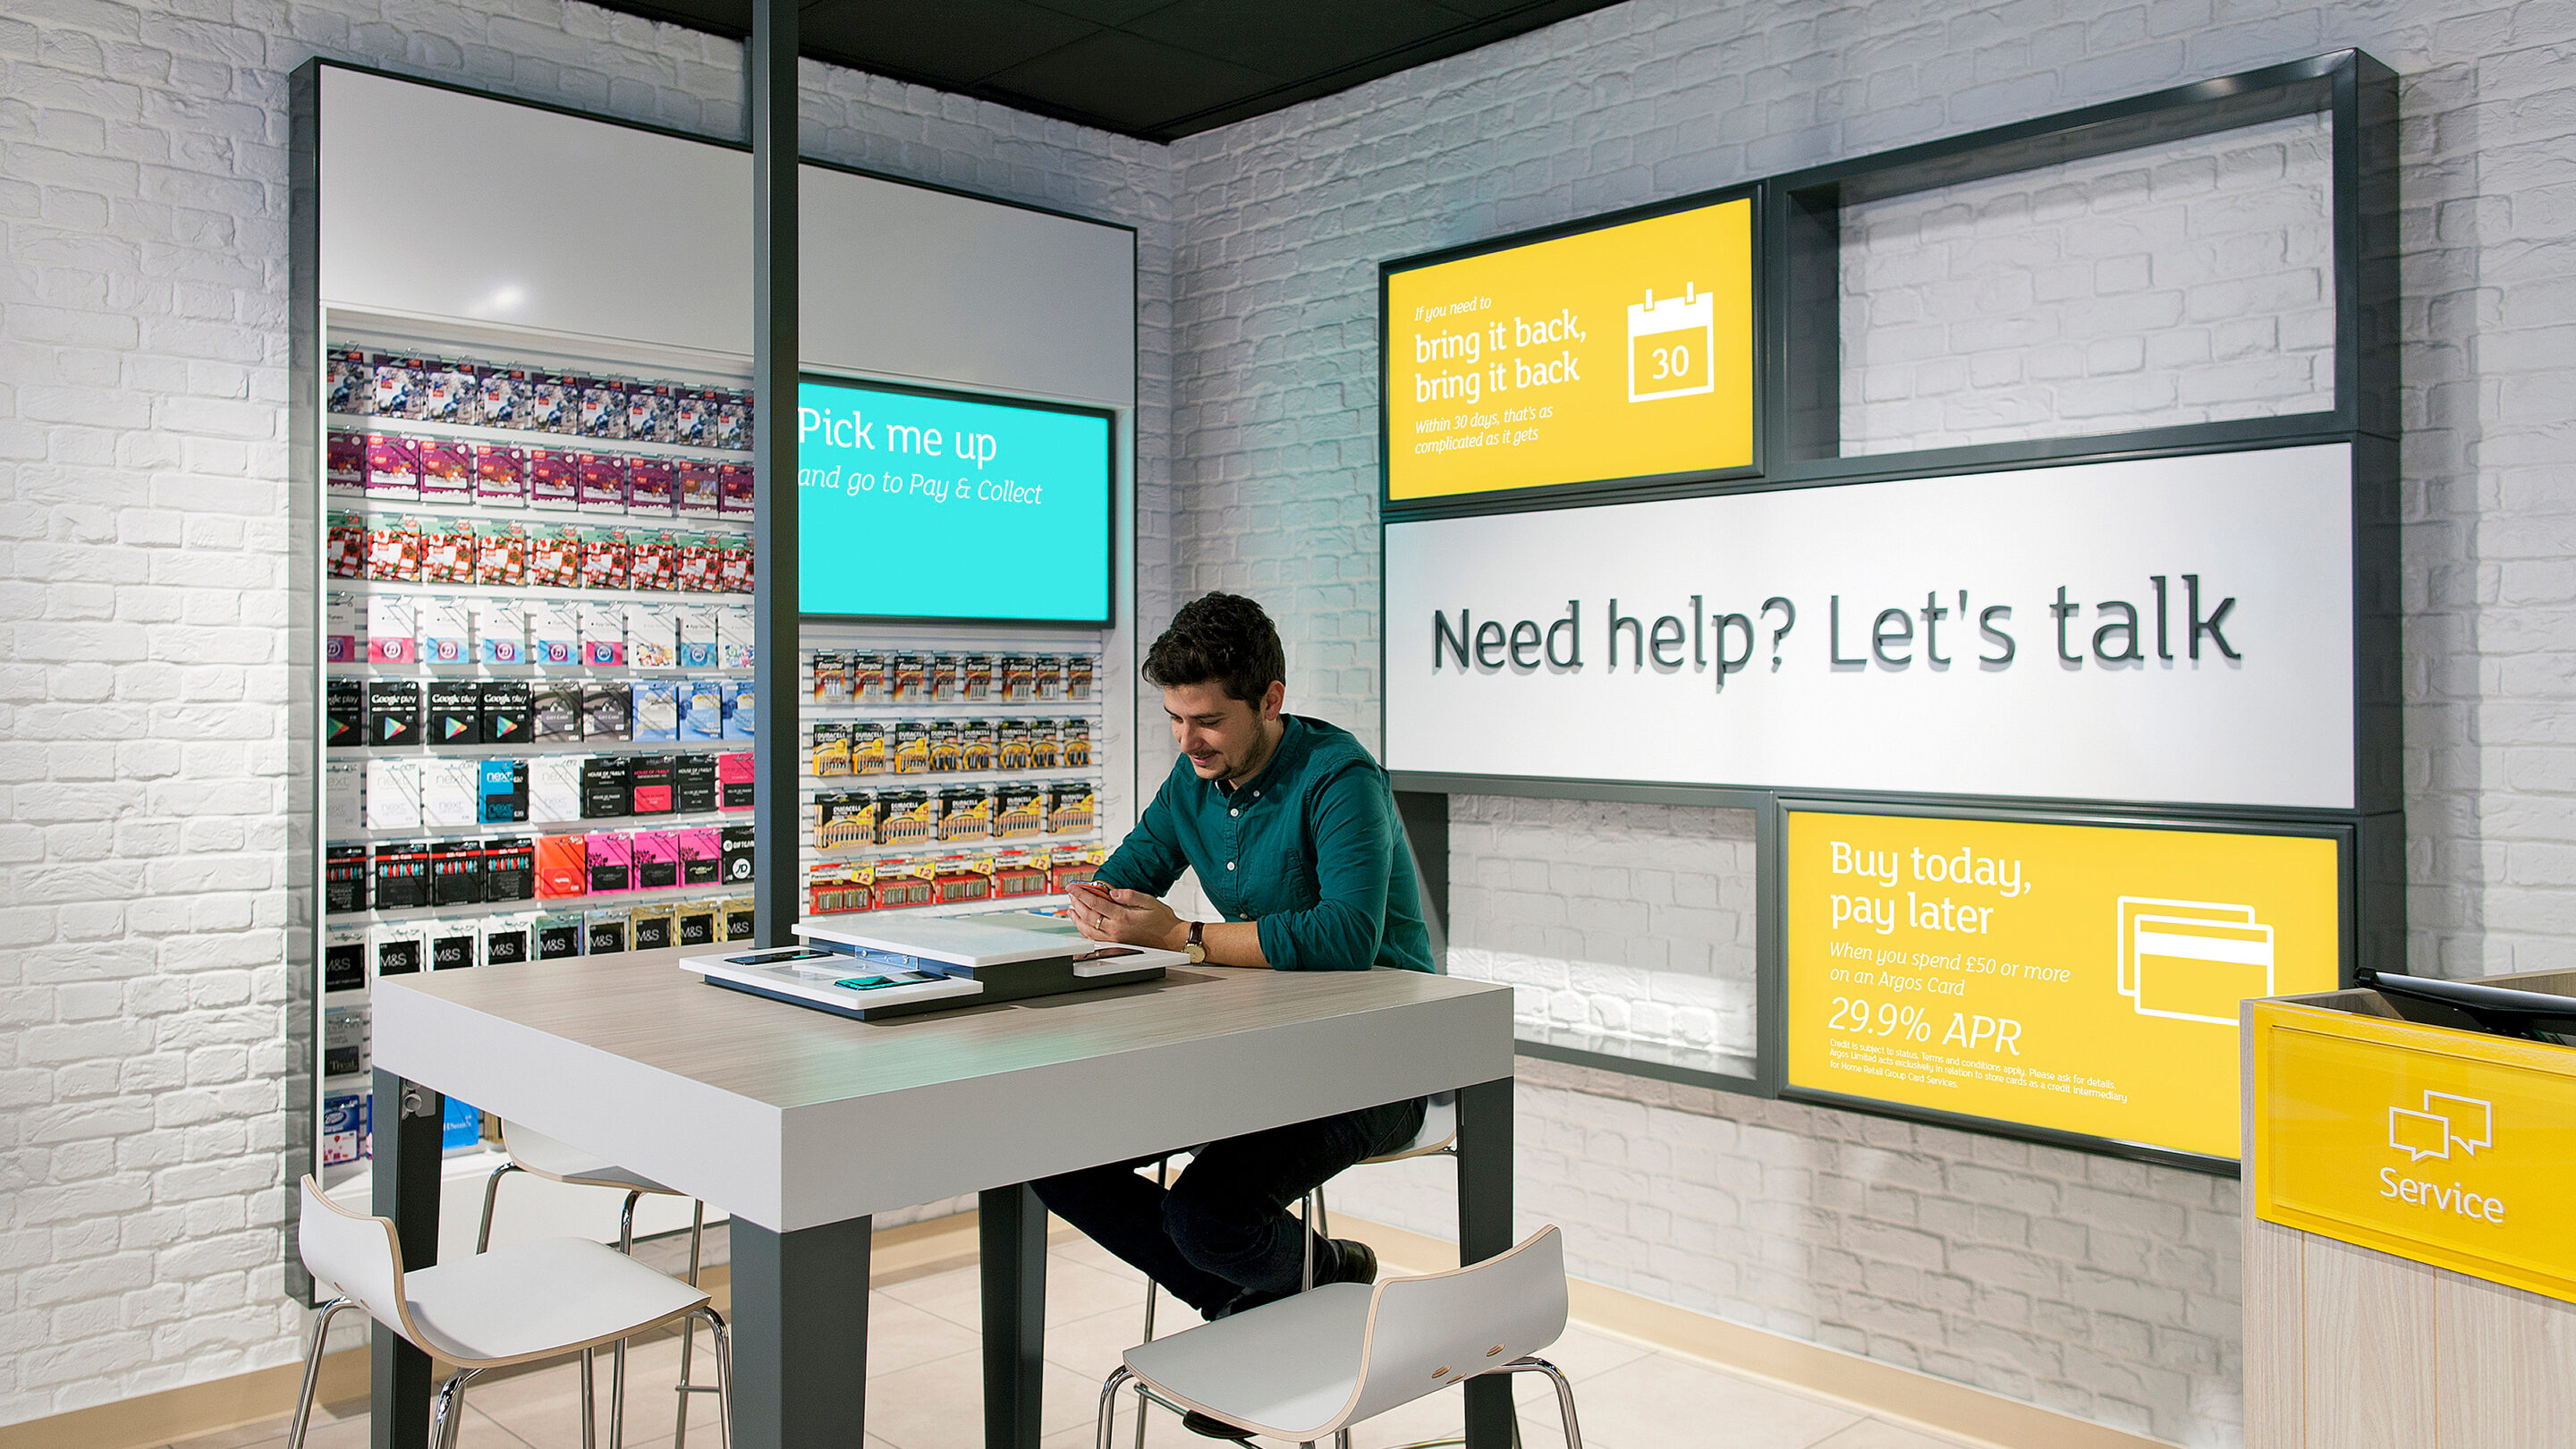 Argos Goes Digital by Creating an Interactive In-Store Experience